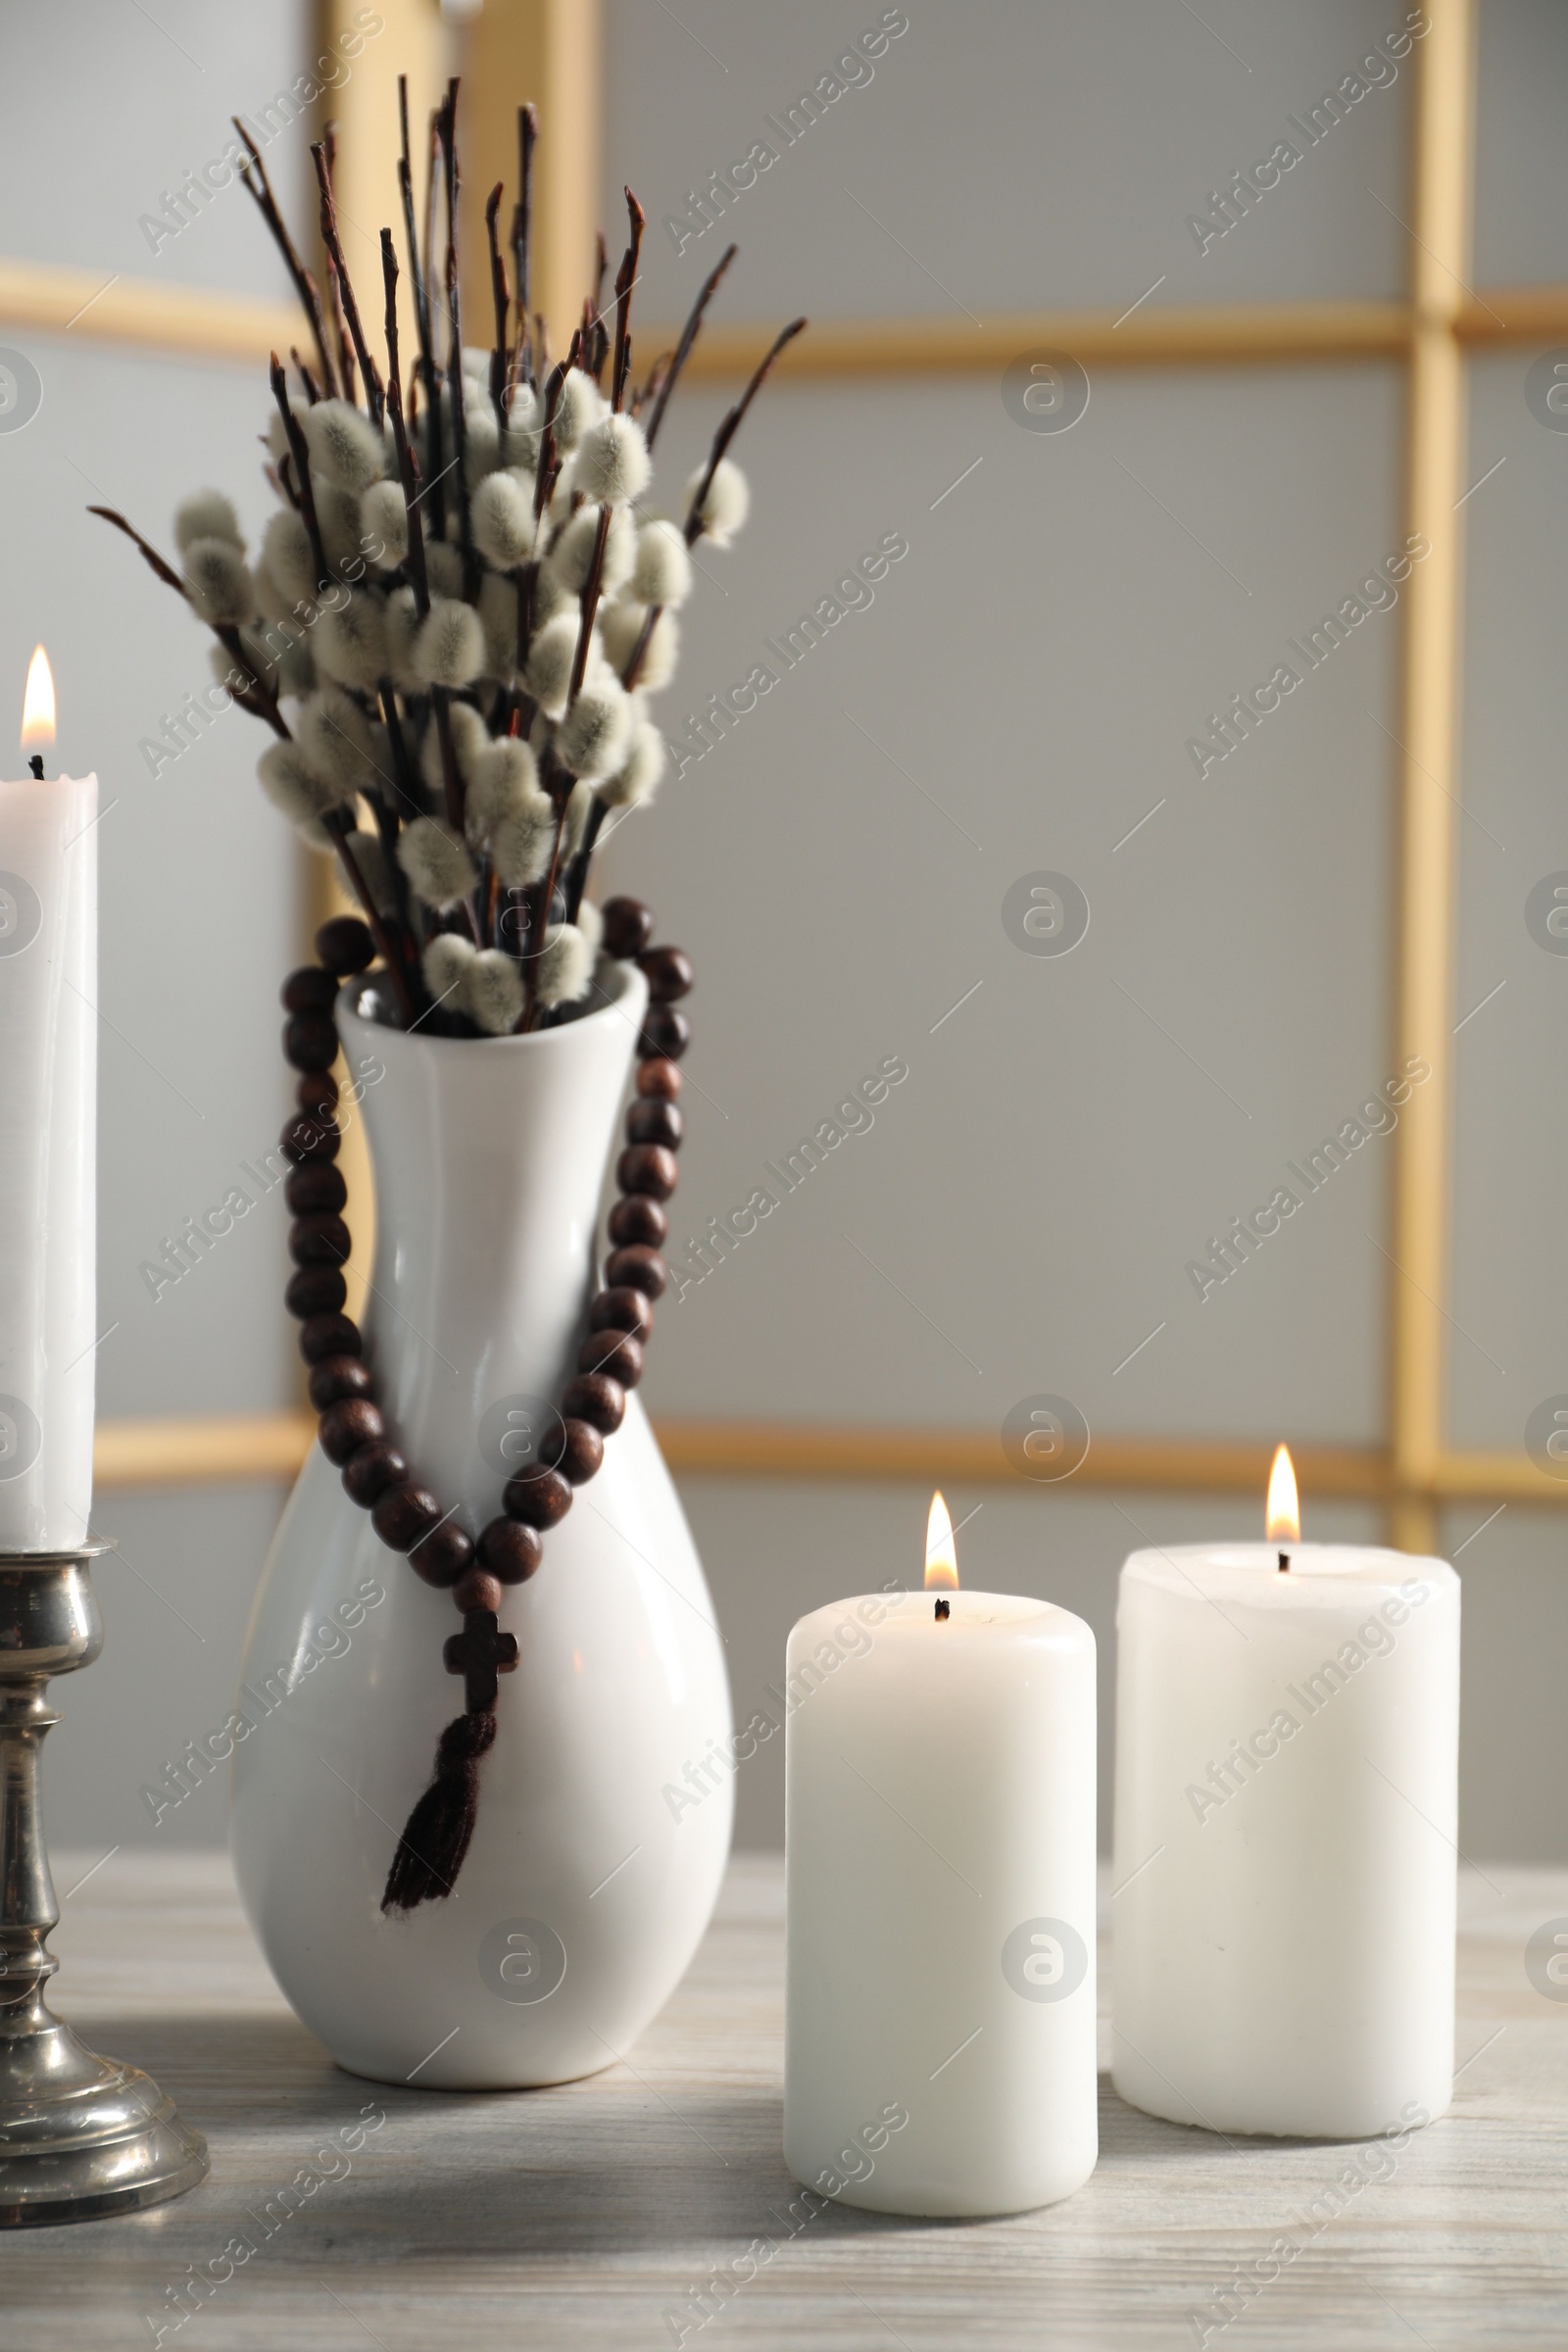 Photo of Rosary beads, burning candles and vase of willow branches on wooden table